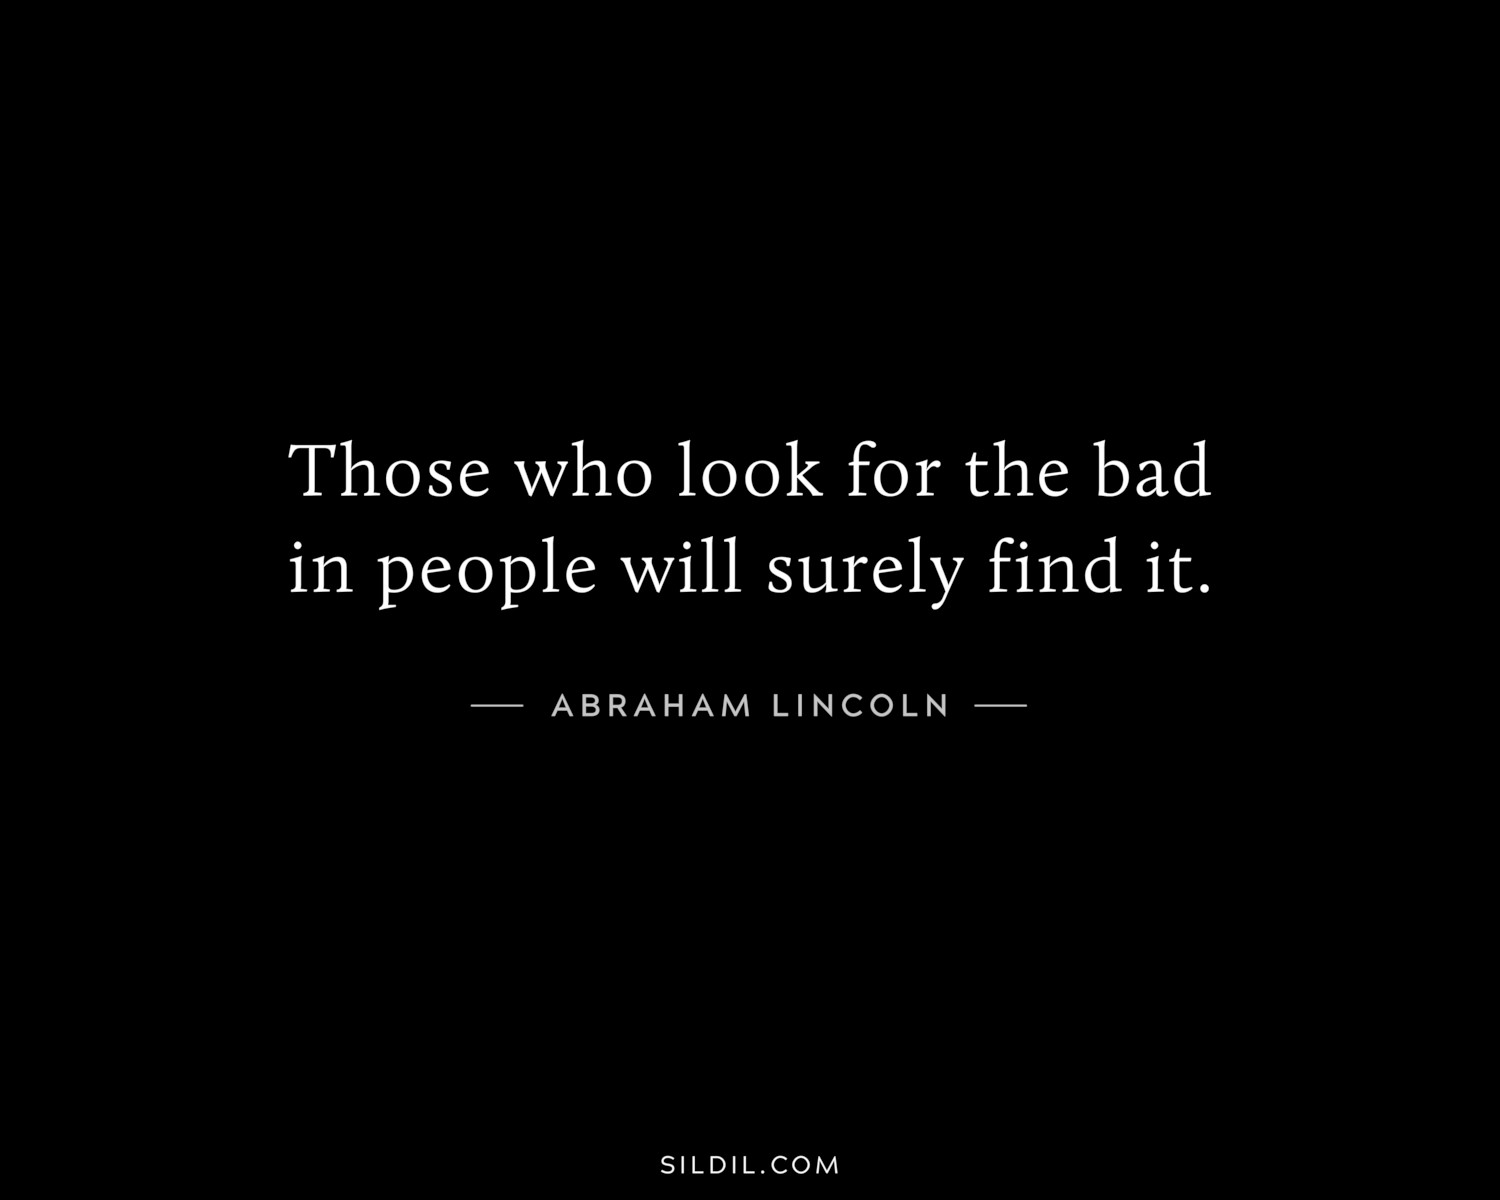 Those who look for the bad in people will surely find it.